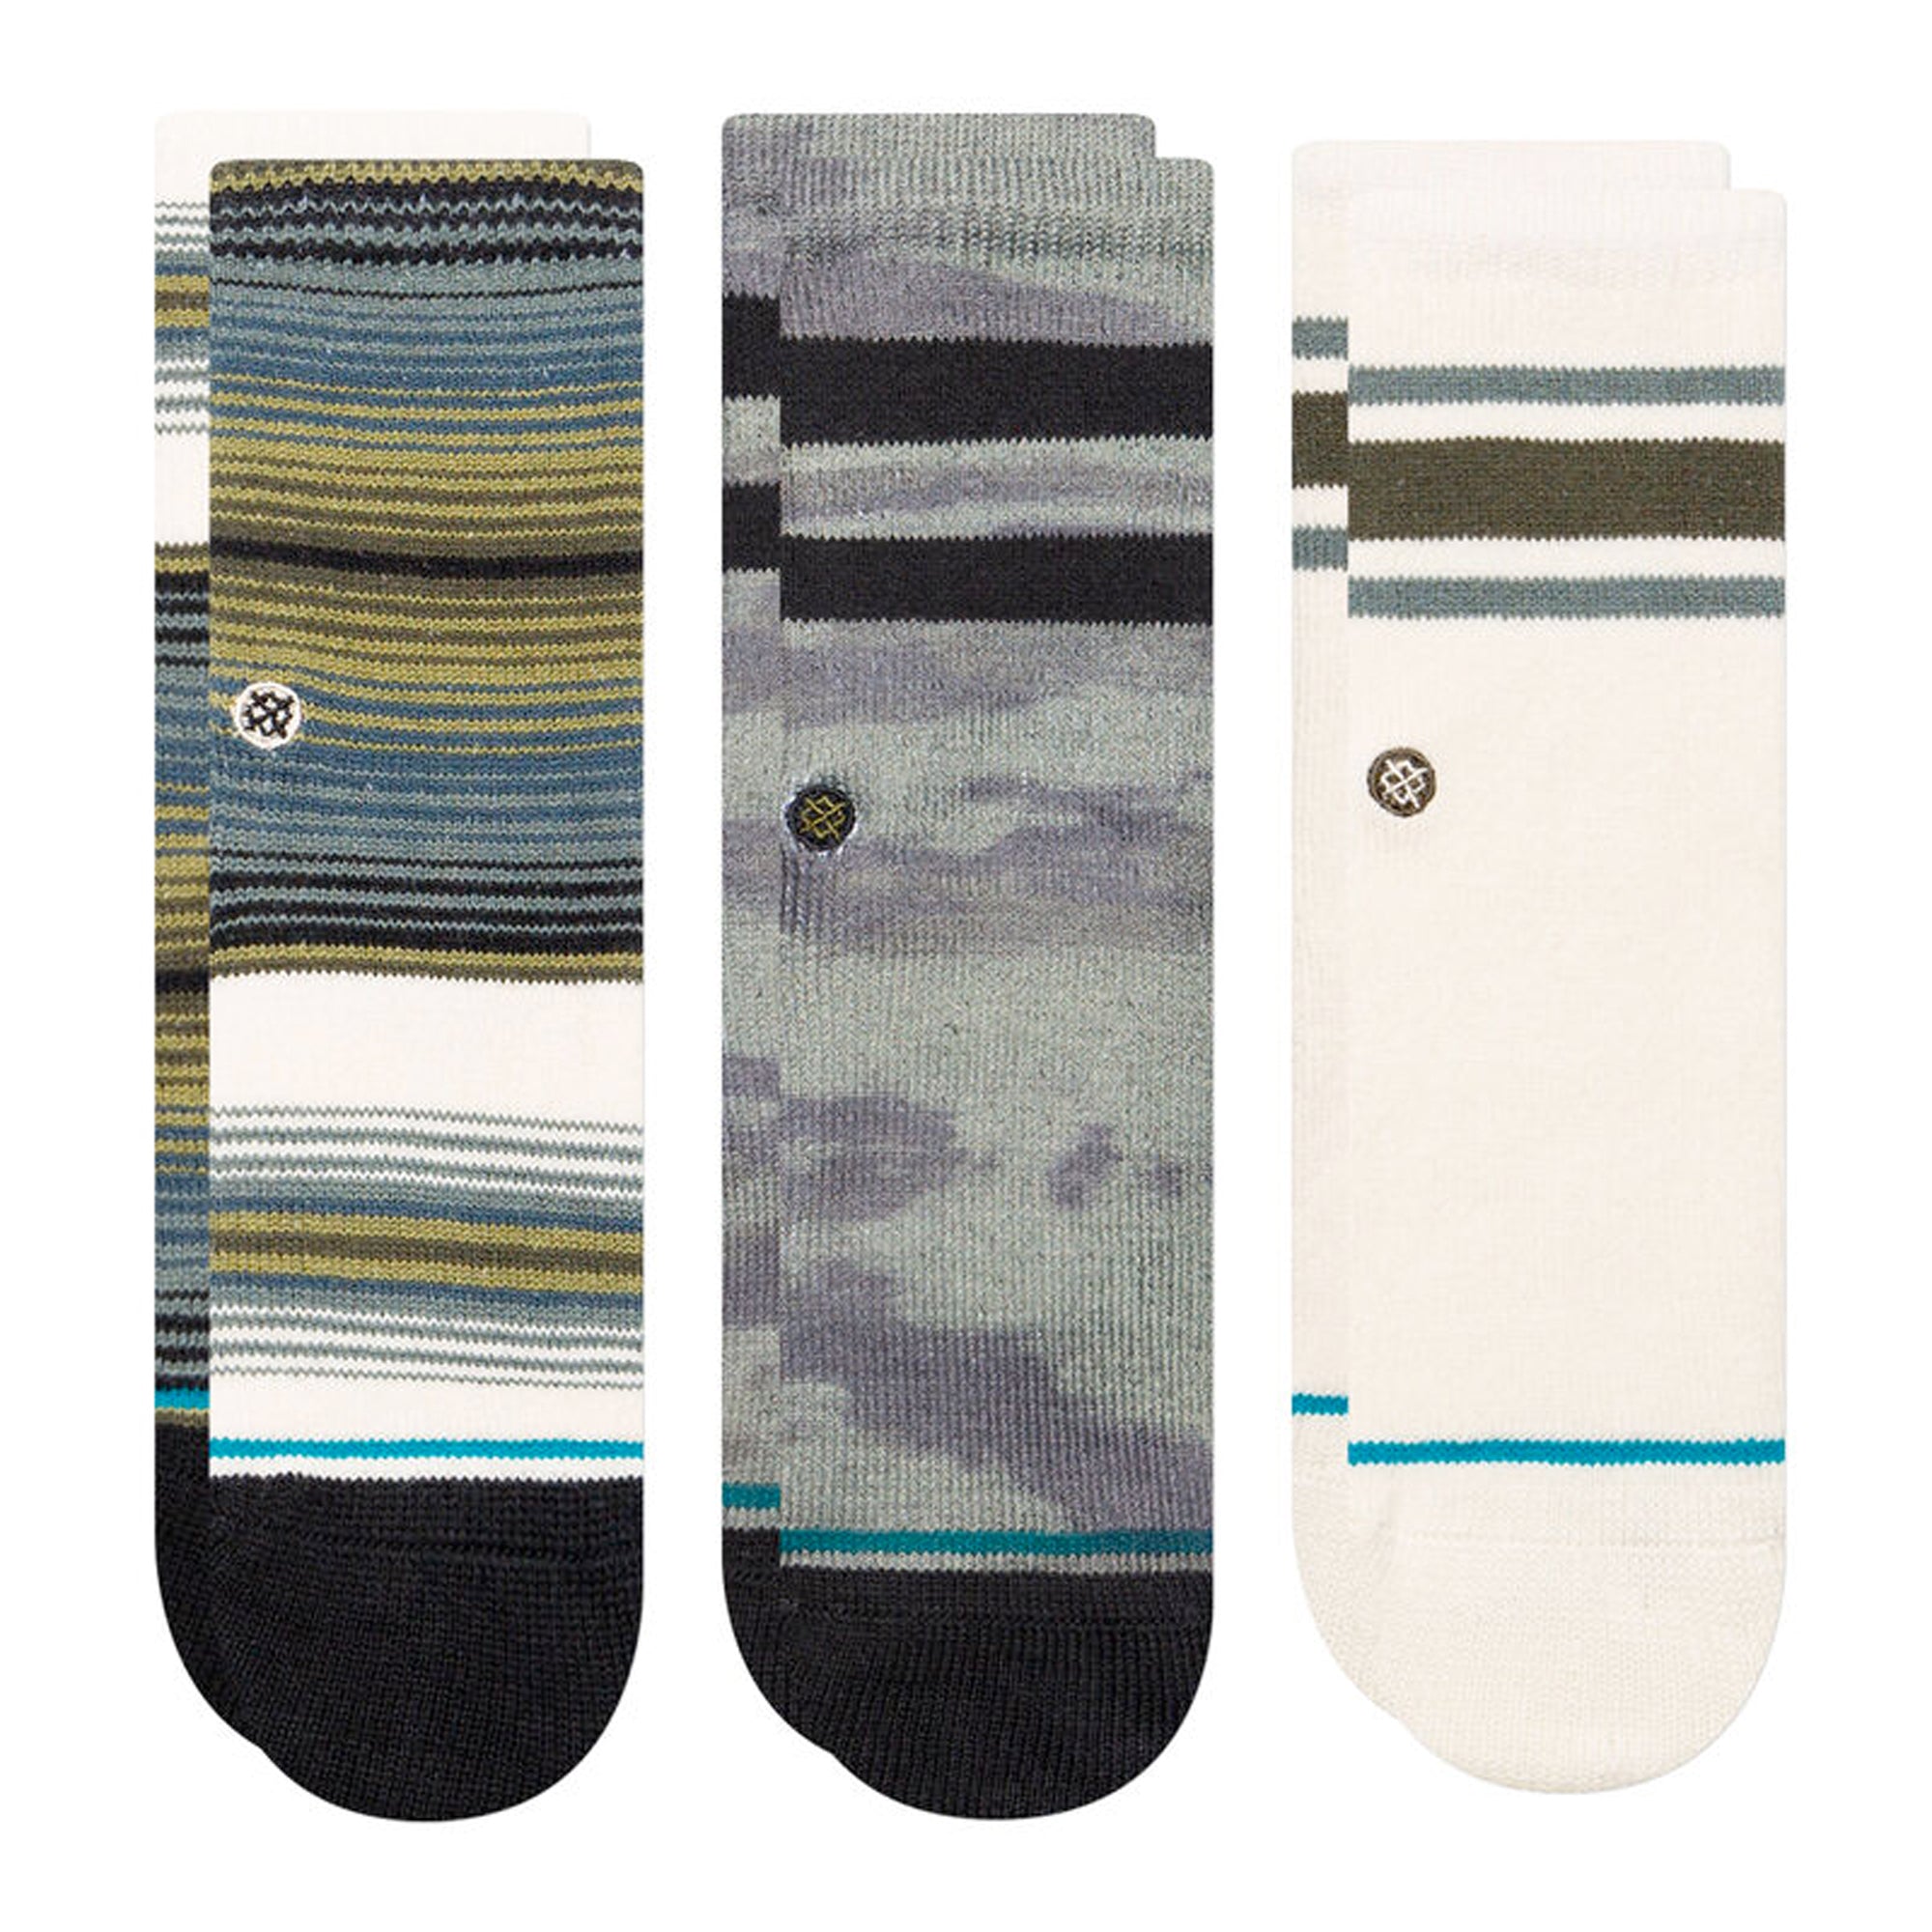 Stance Baby and Toddler Crew Socks 3 Pack